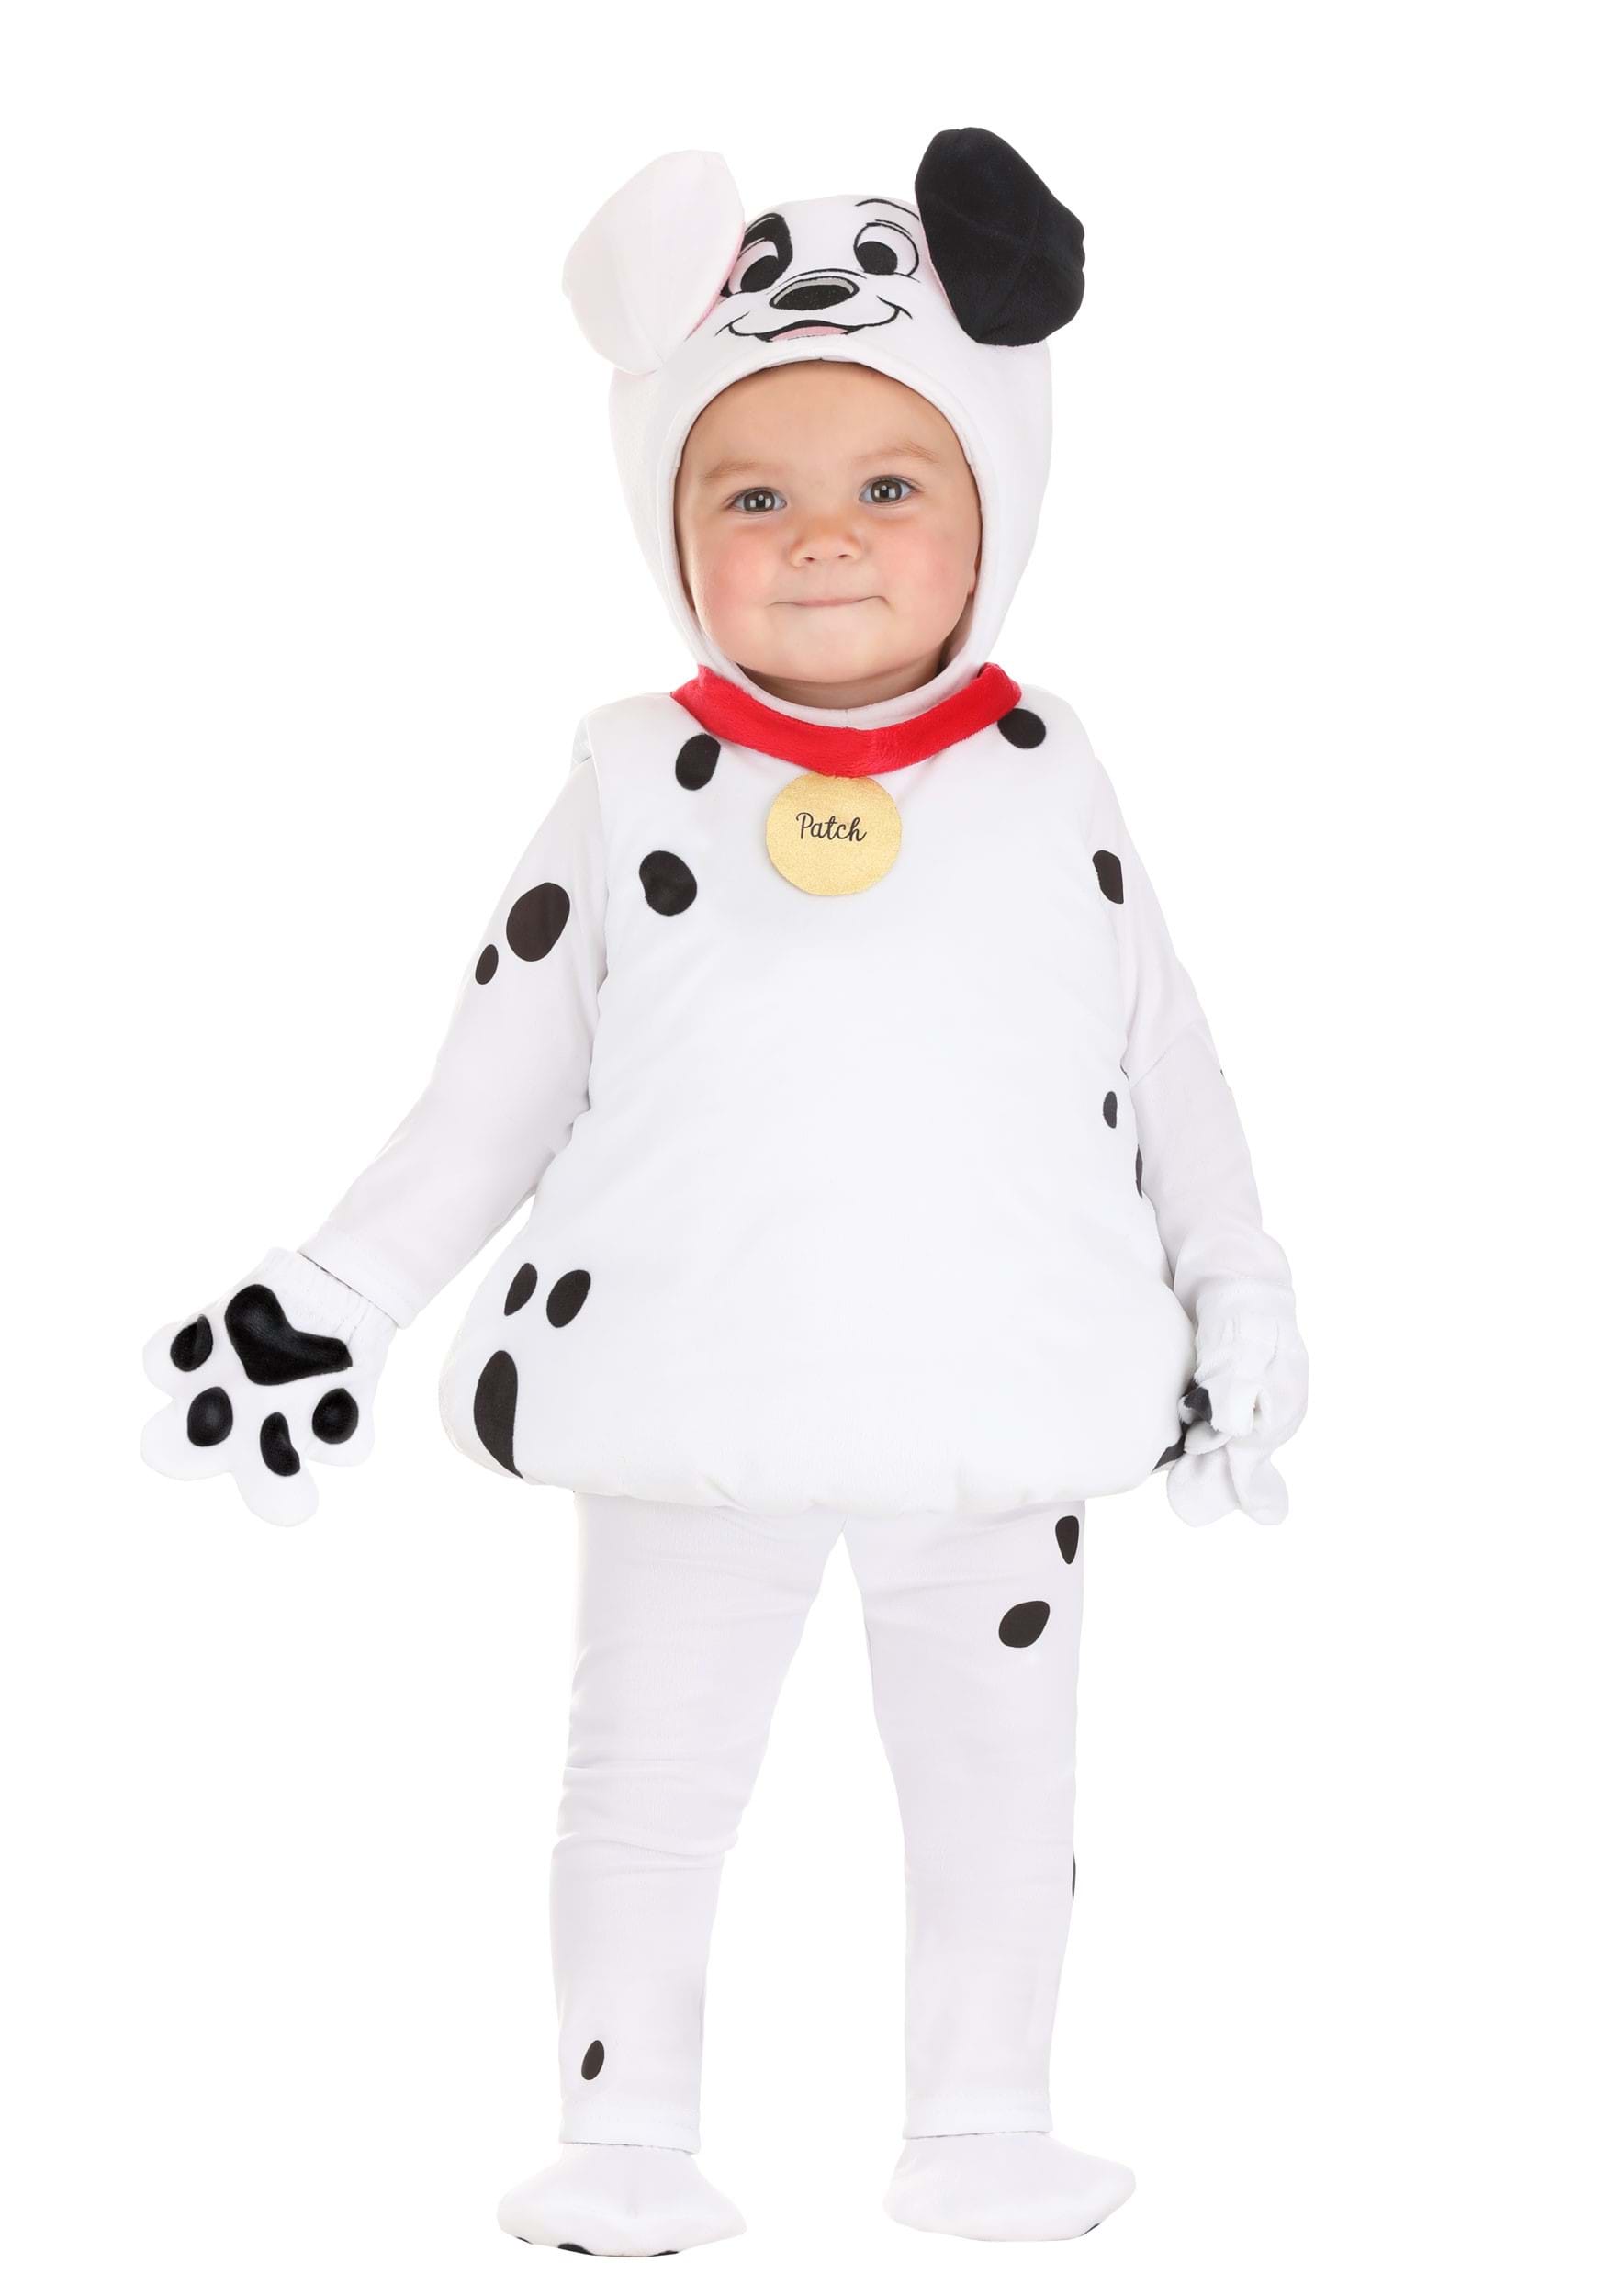 Photos - Fancy Dress Bubble FUN Costumes Infant 101 Dalmatians  Costume | Made by Us Disney Cost 